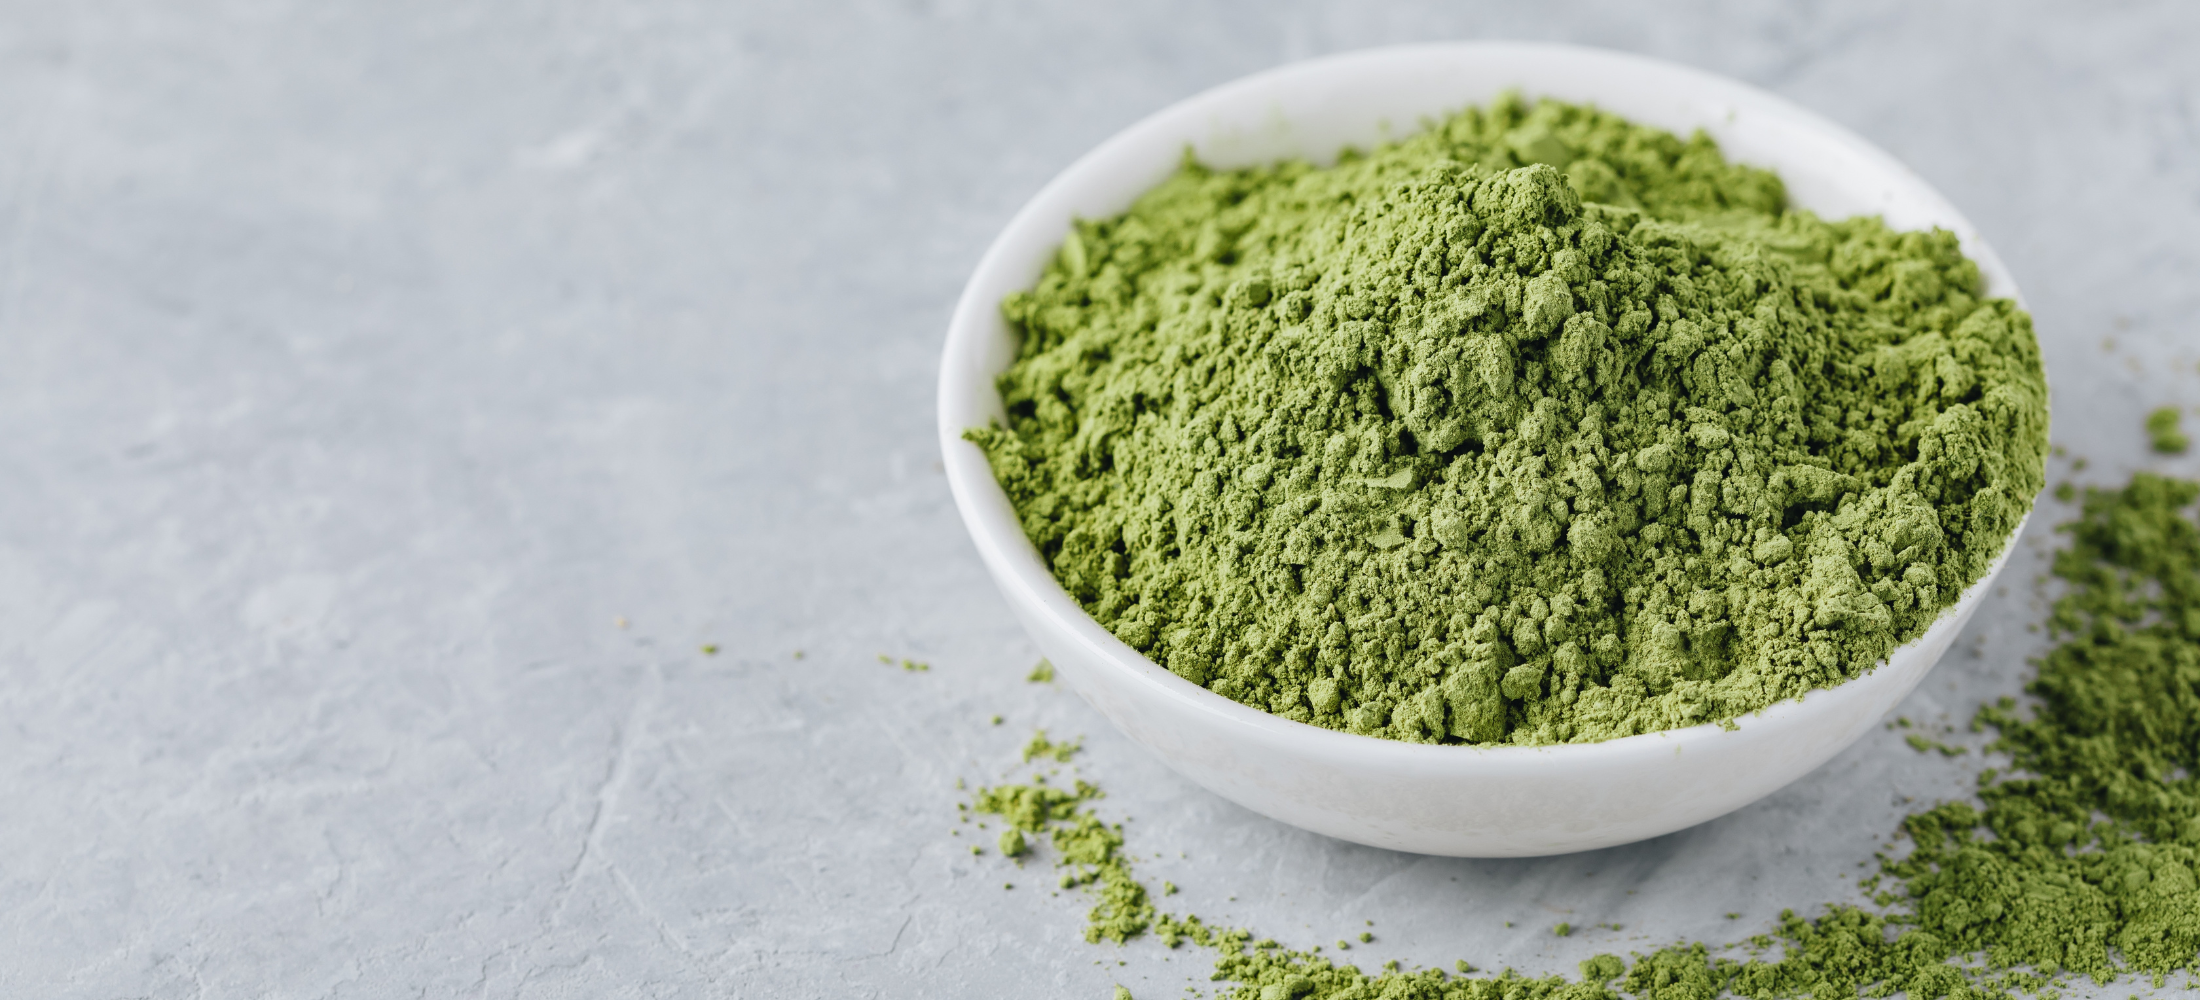 green matcha powder in a white round bowl on grey countertop. 